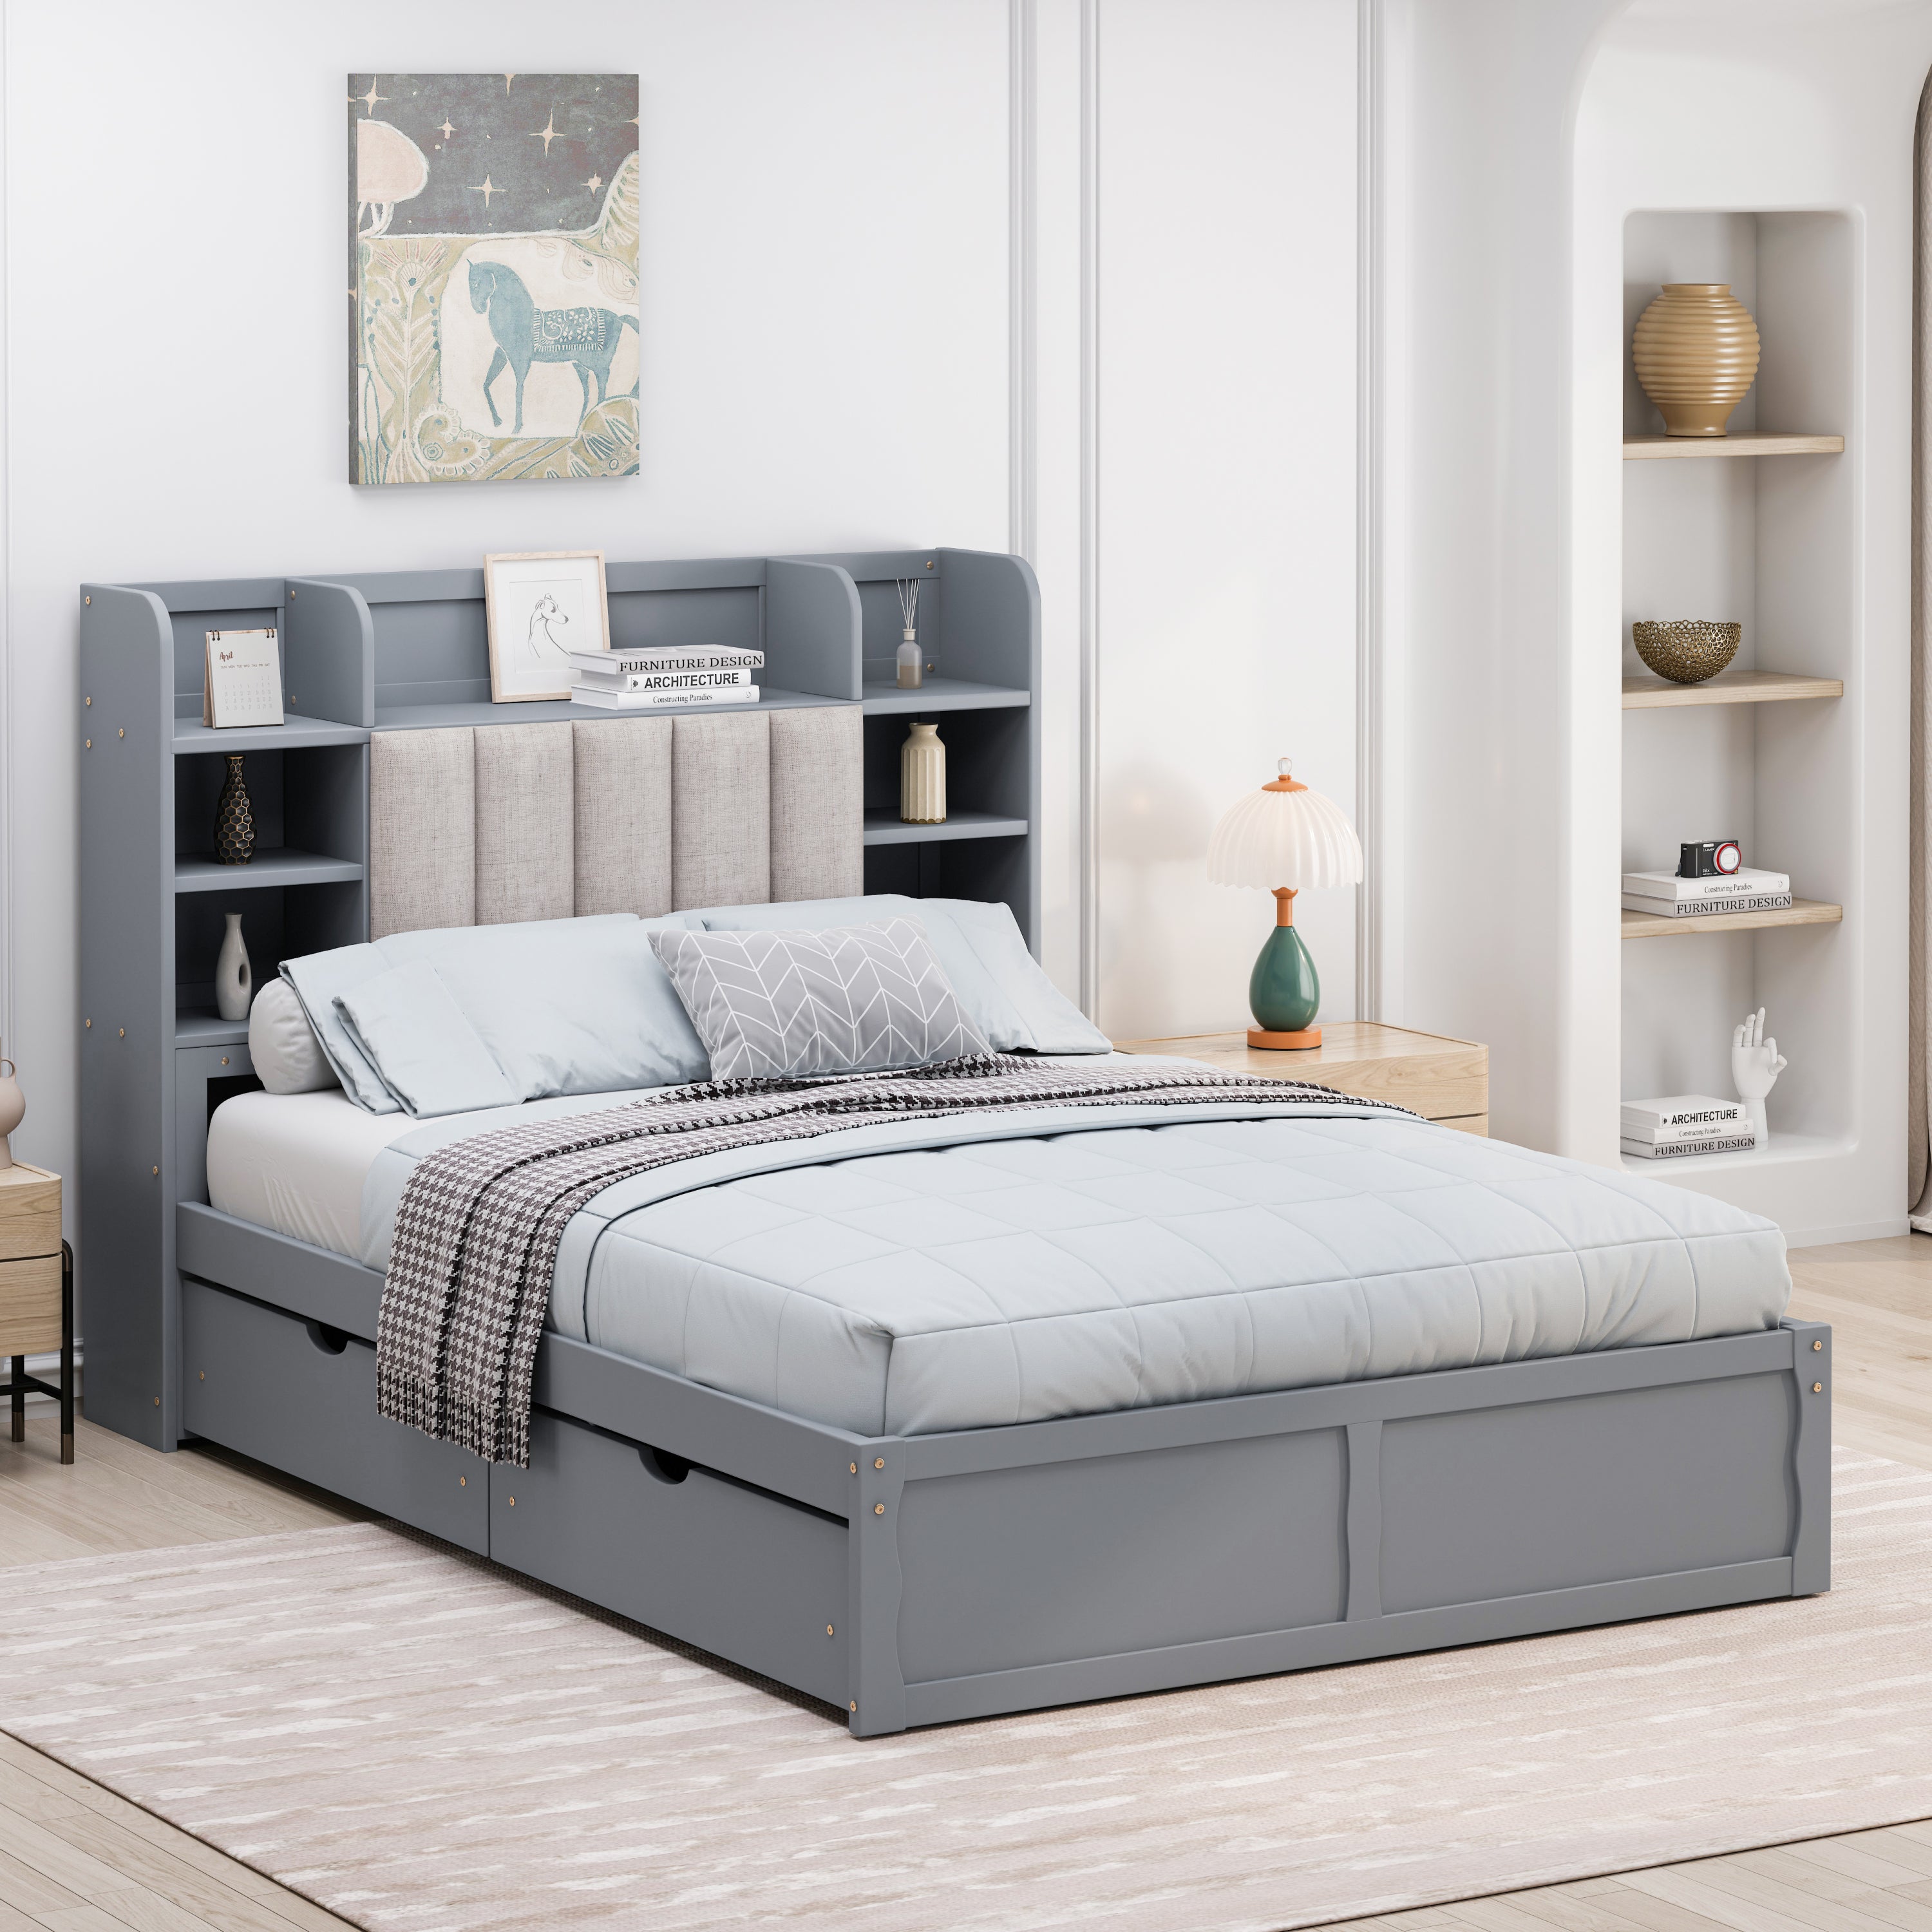 Multi-functional Full Size Bed Frame with 4 Under-bed Portable Storage Drawers and Multi-tier Bedside Storage Shelves, Grey